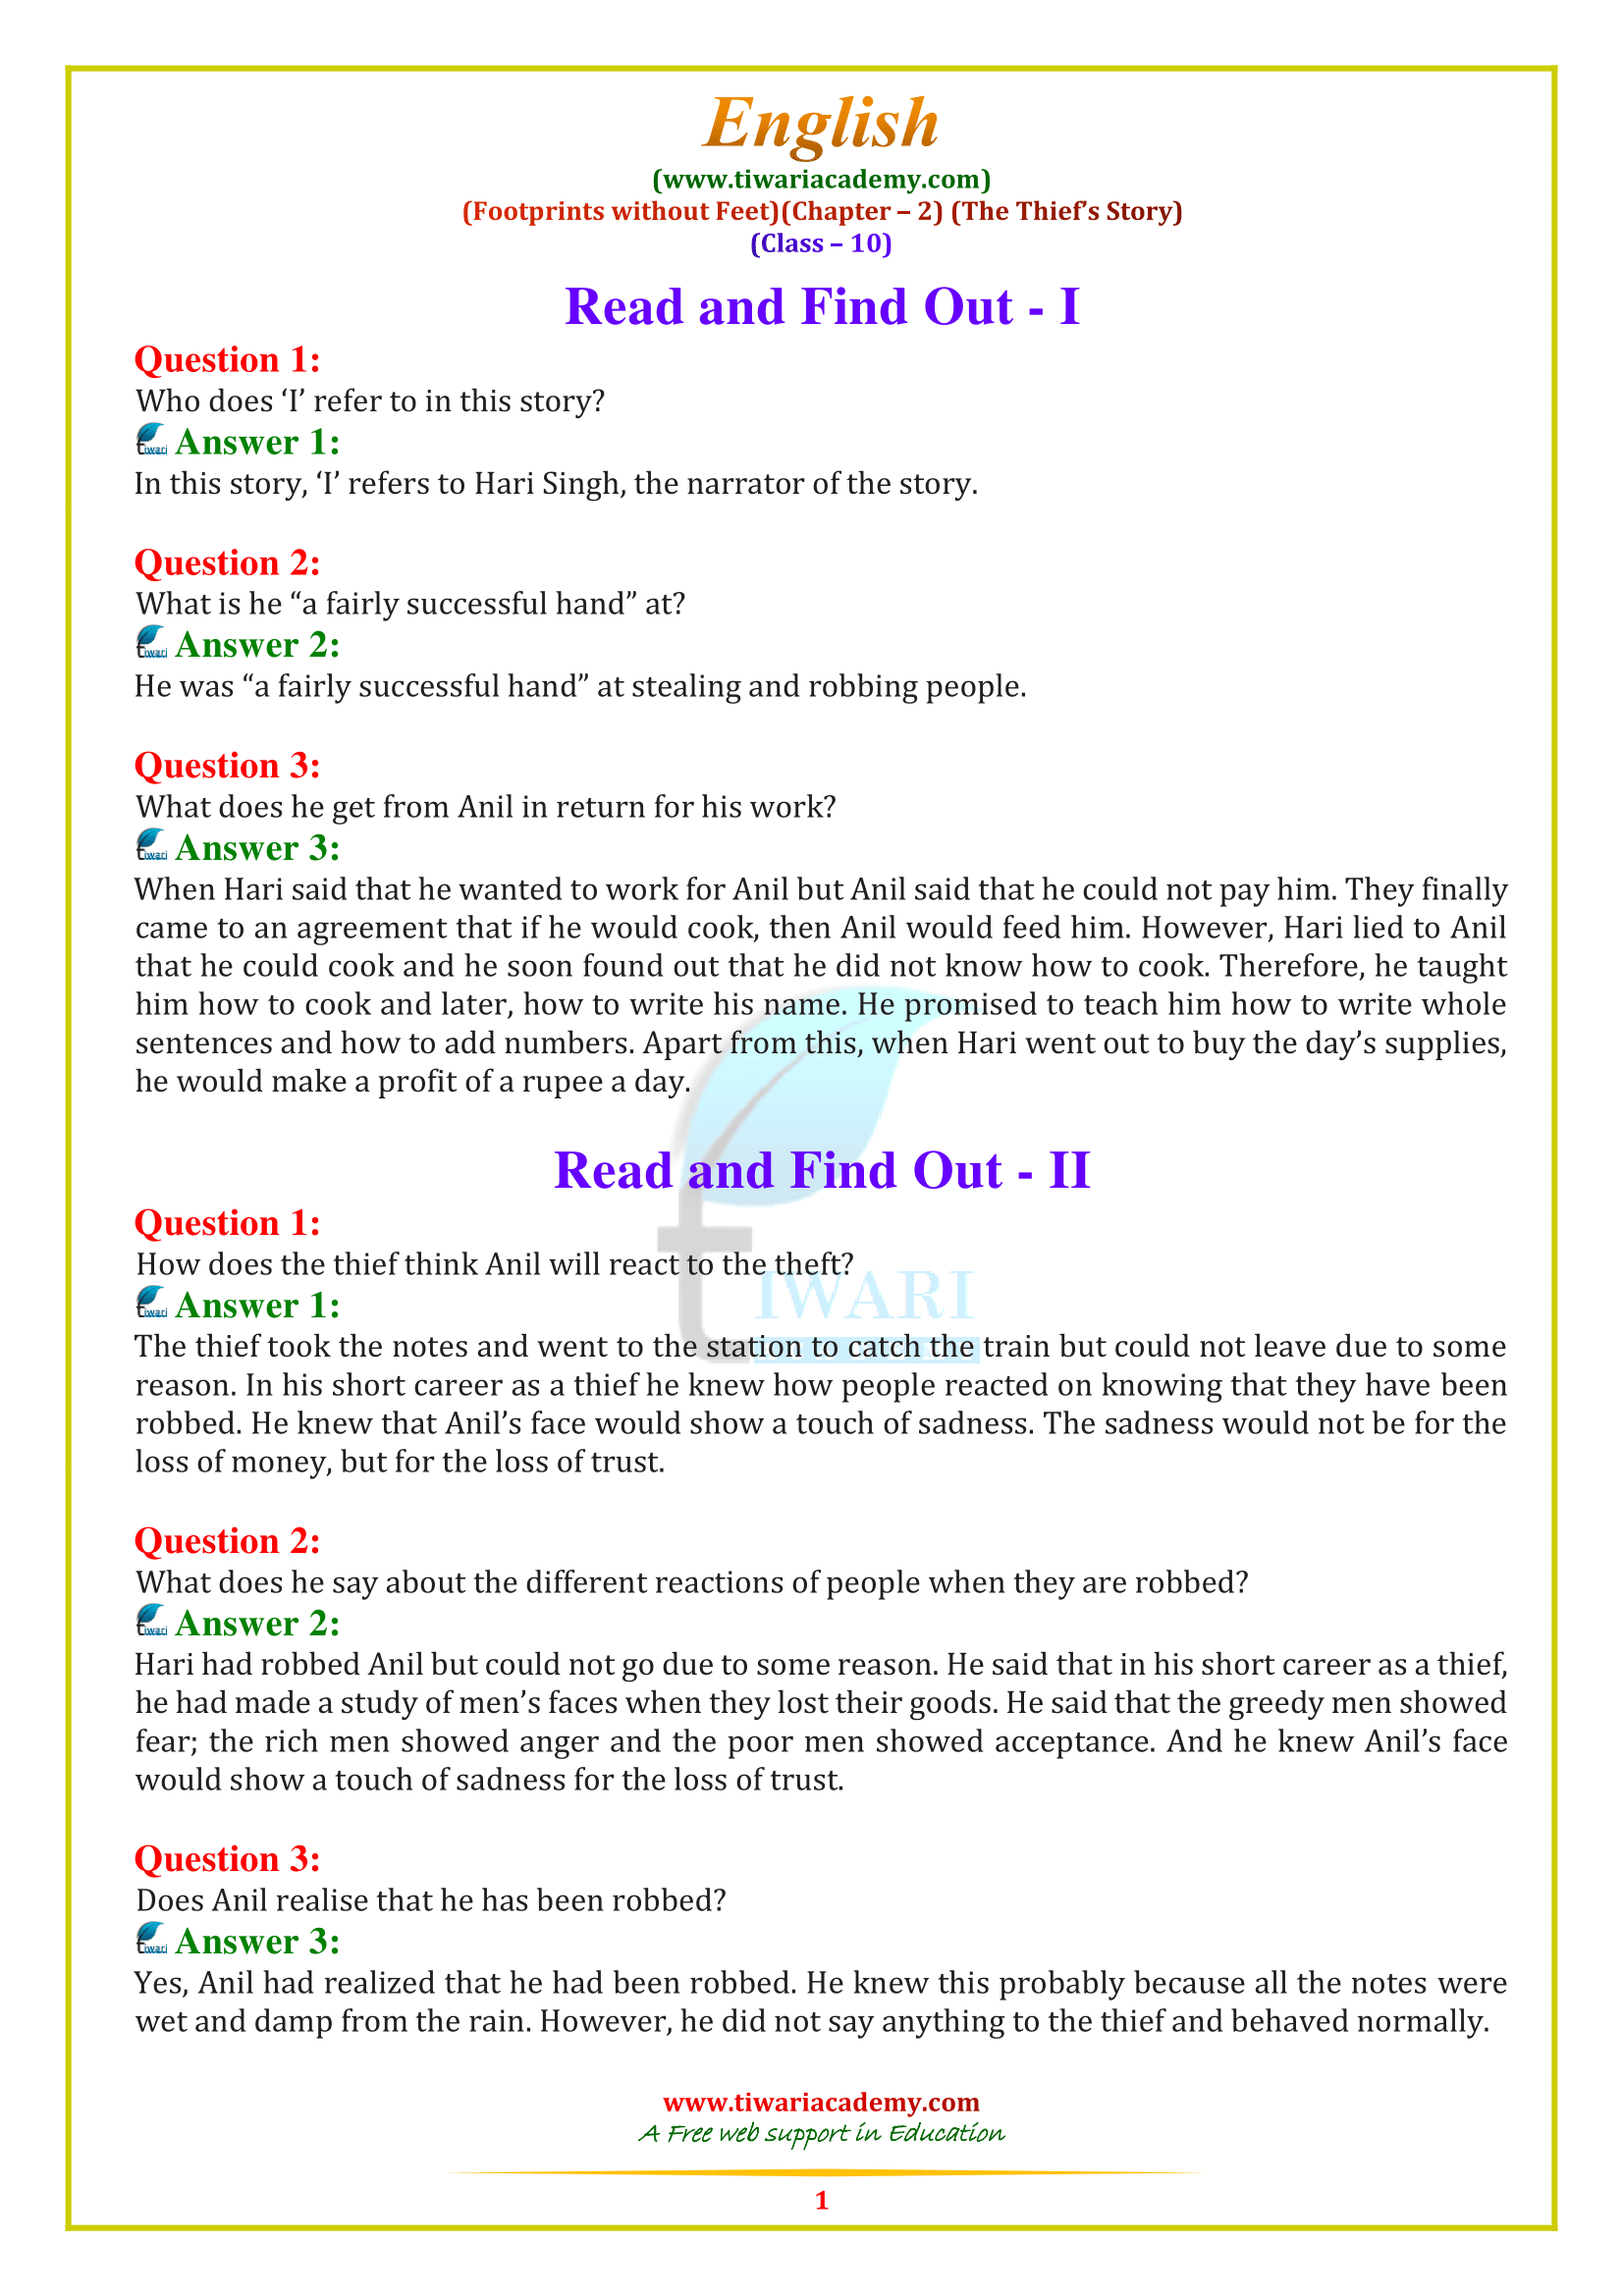 10 English footprints without feet chapter 2